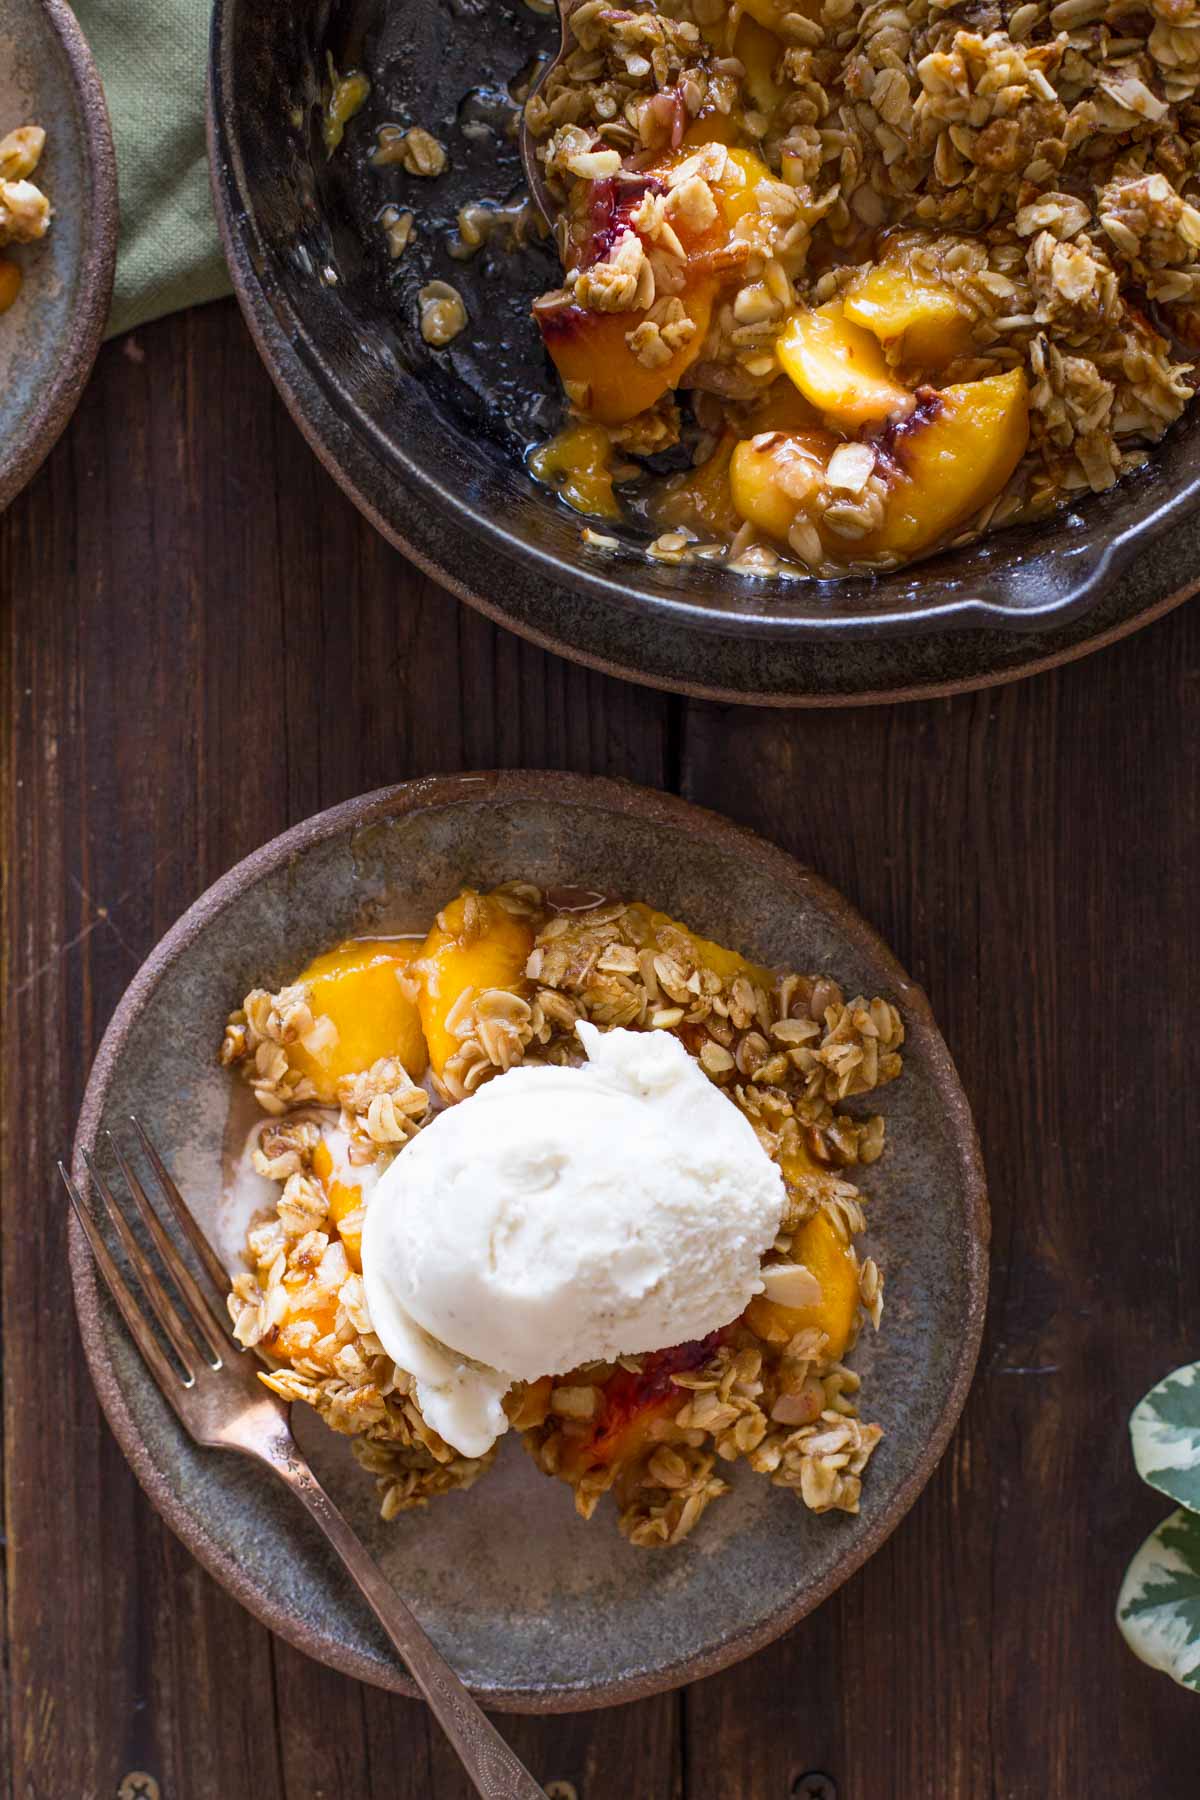 A plate of Easy Skillet Peach Crisp topped with vanilla ice cream, sitting next to the skillet of Peach Crisp.